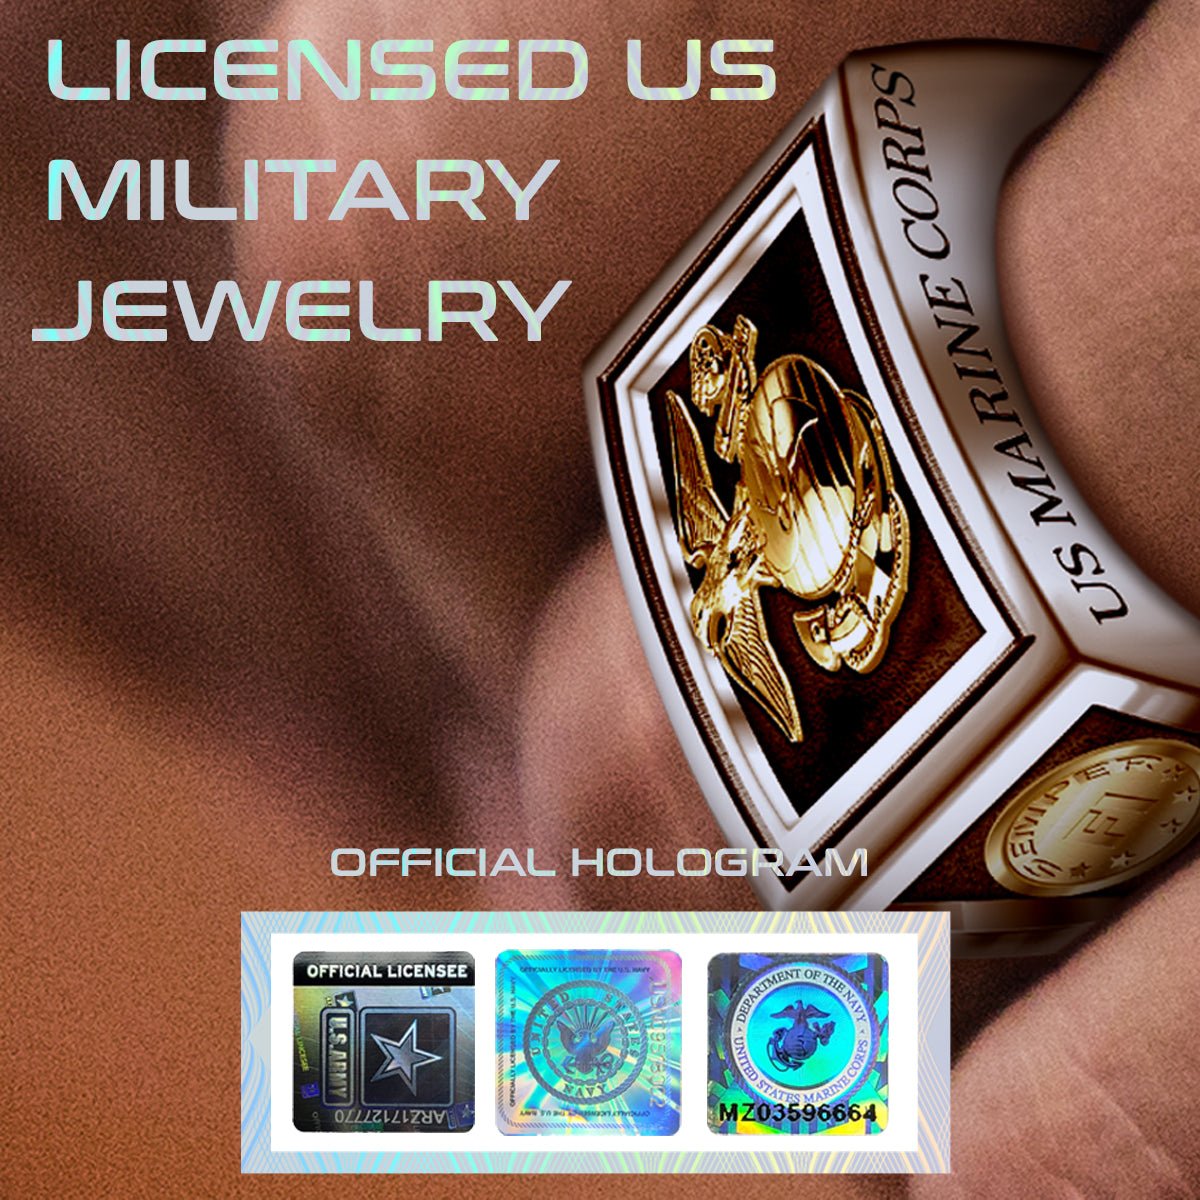 Why buy officially licensed US Militay Jewelry - US Jewels